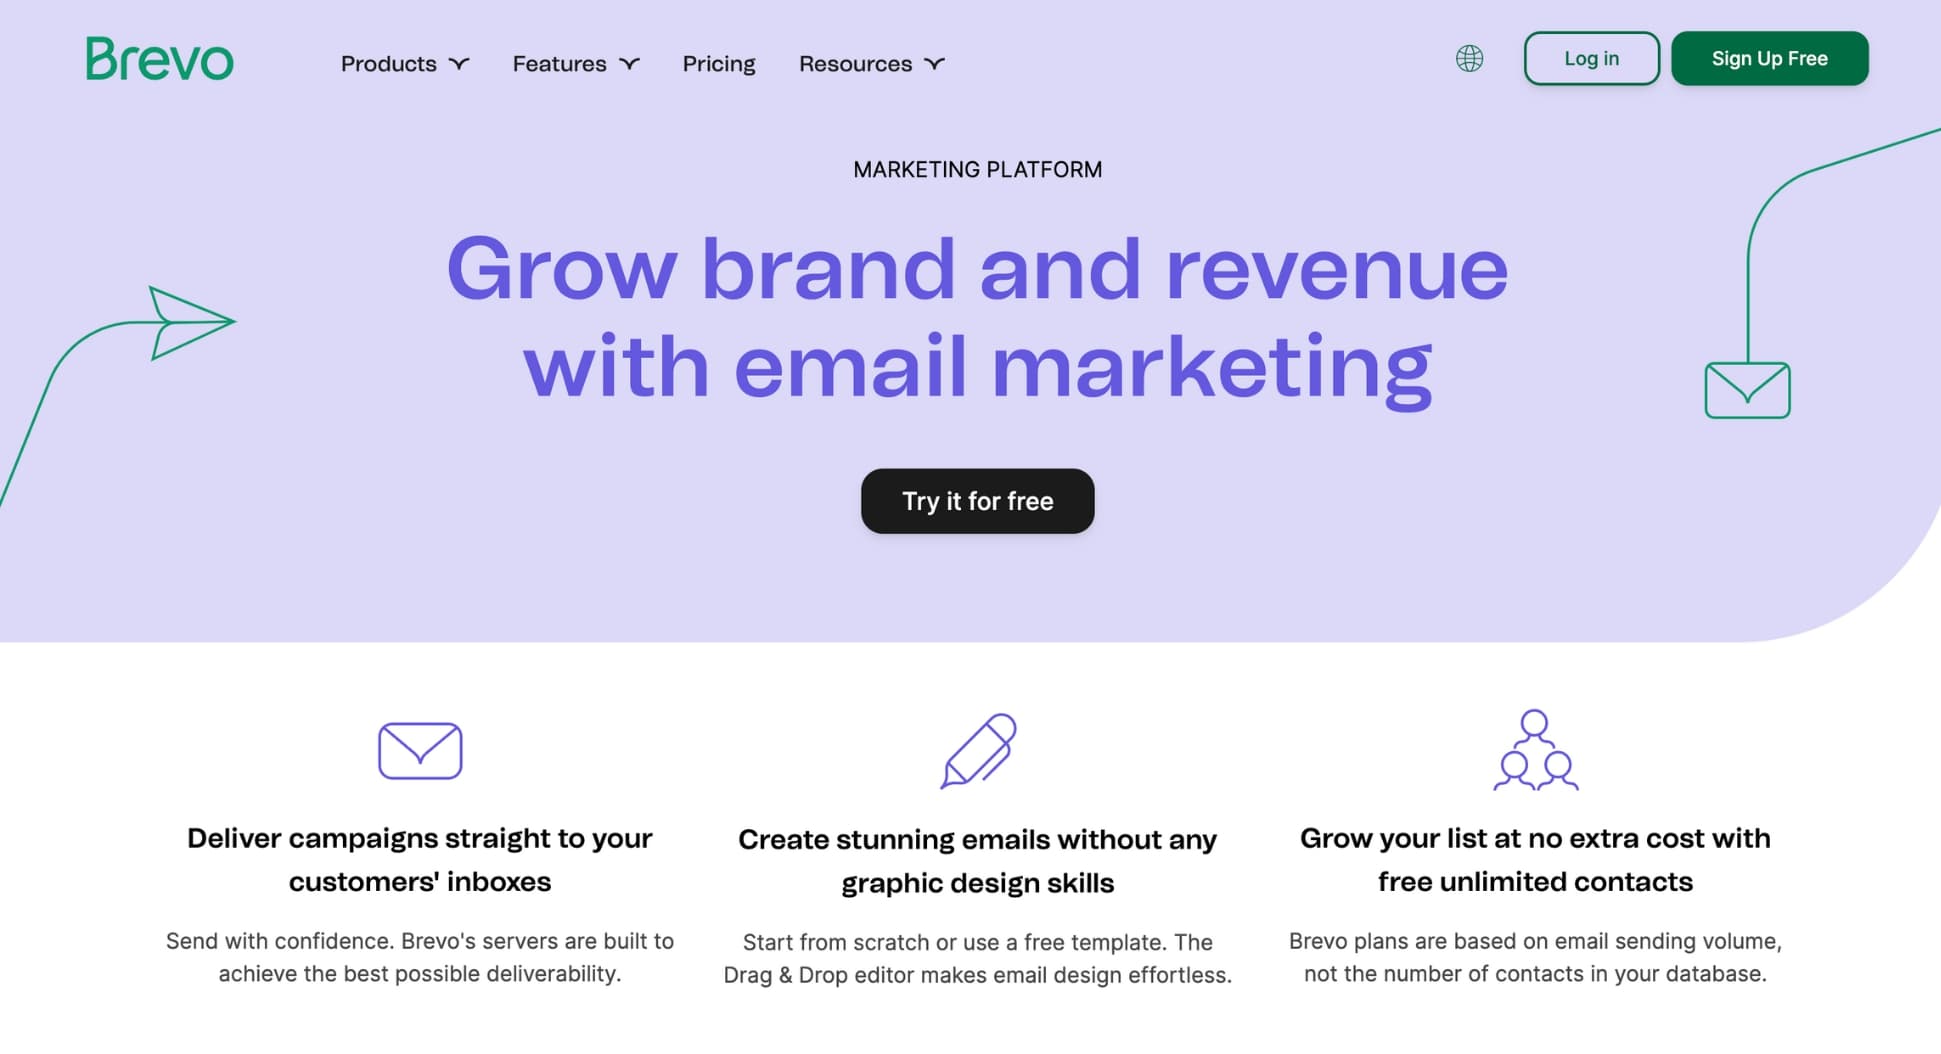 Brevo is an all-in-one email sending tool